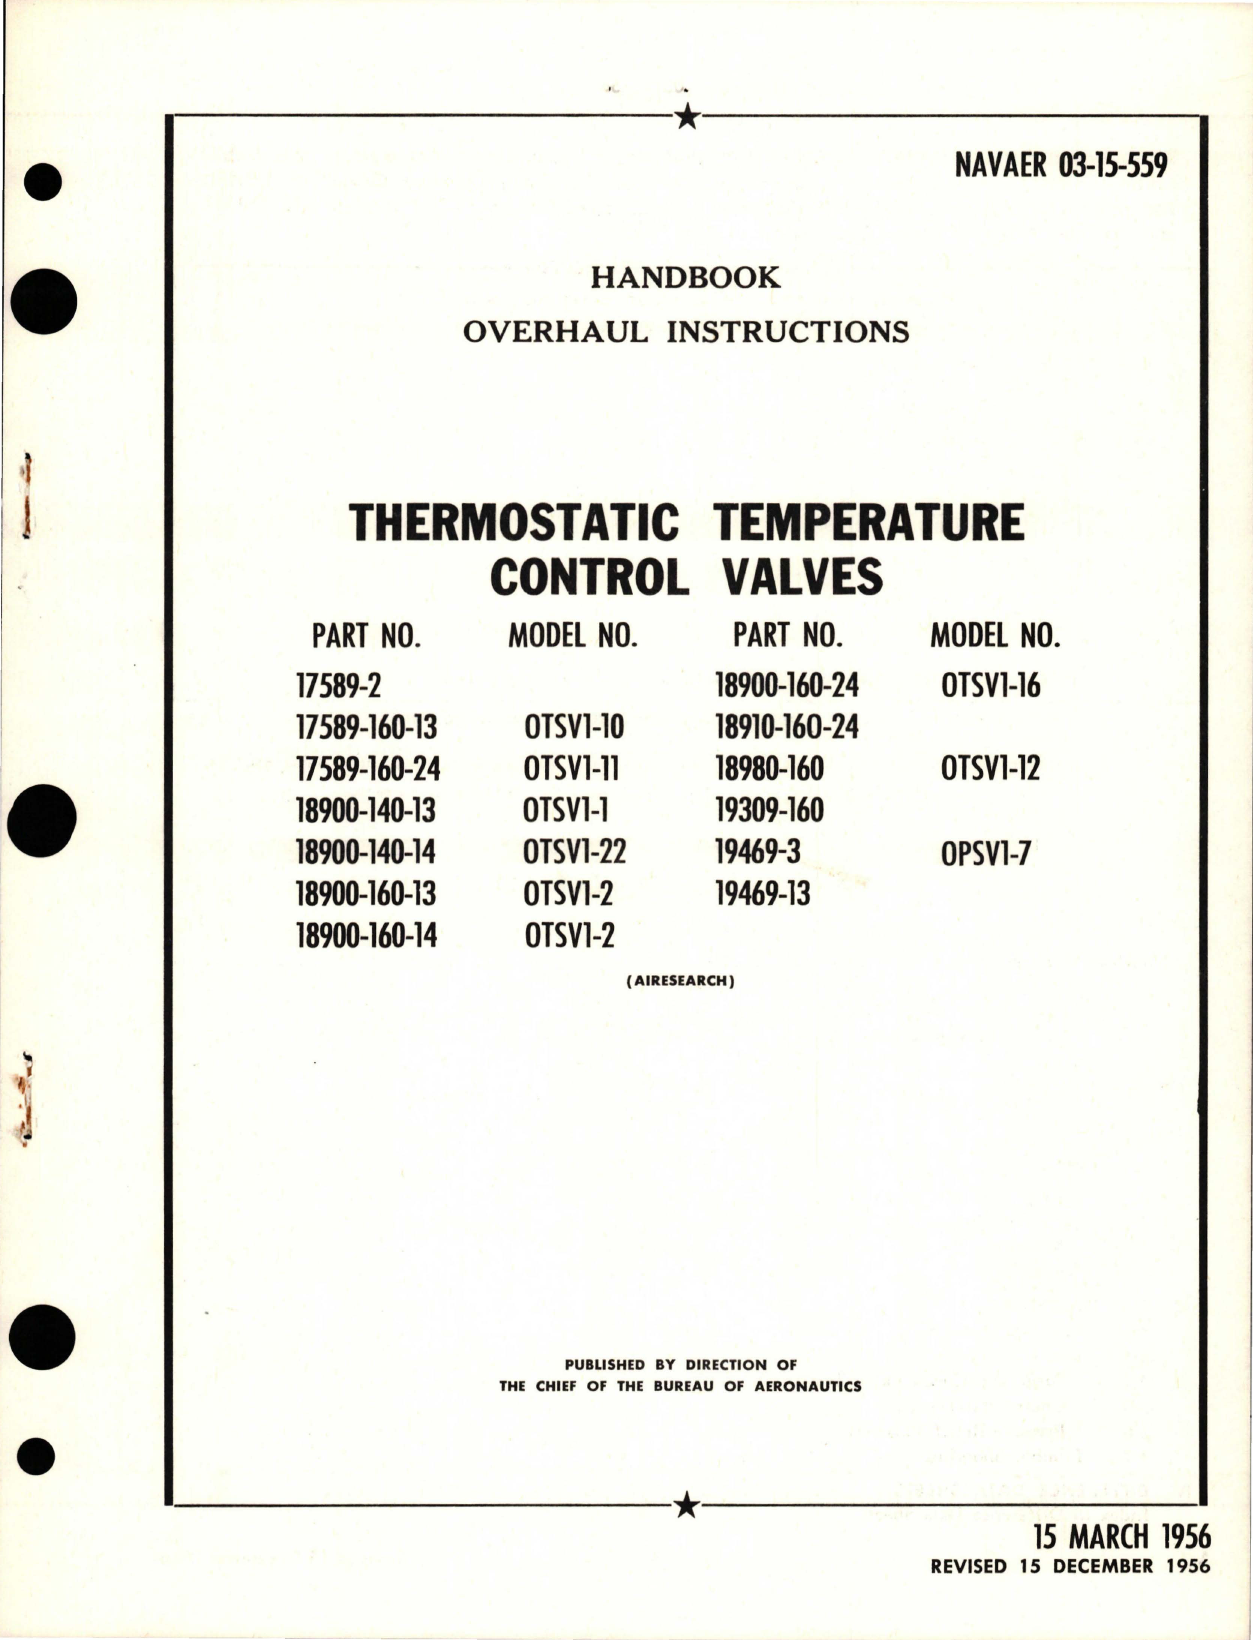 Sample page 1 from AirCorps Library document: Overhaul Instructions for Thermostatic Temperature Control Valves